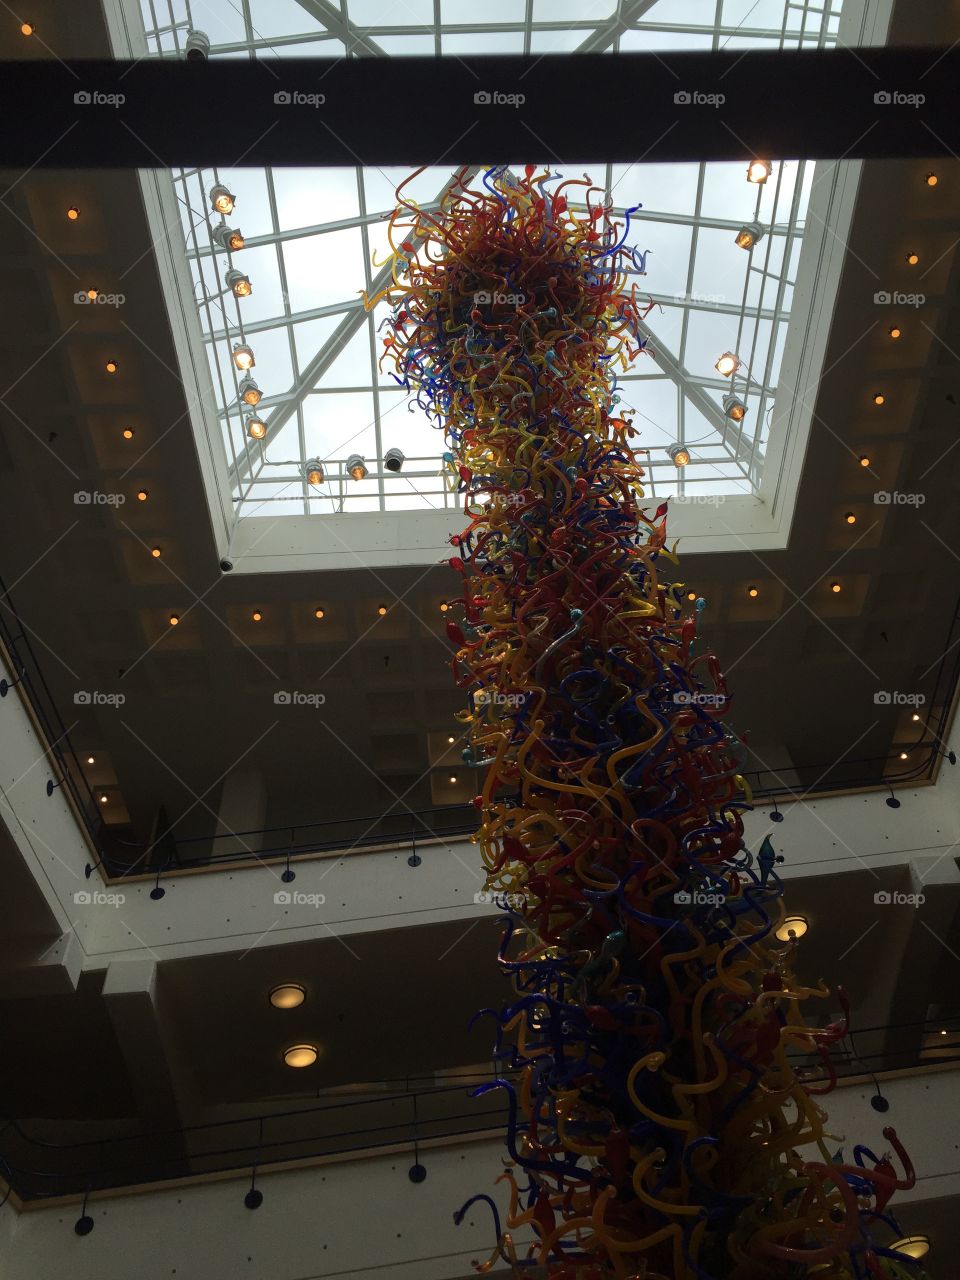 This is a large scale blown glass sculpture at the Indy Children's Museum.  It was made by the artist, Dale Chihuly.  